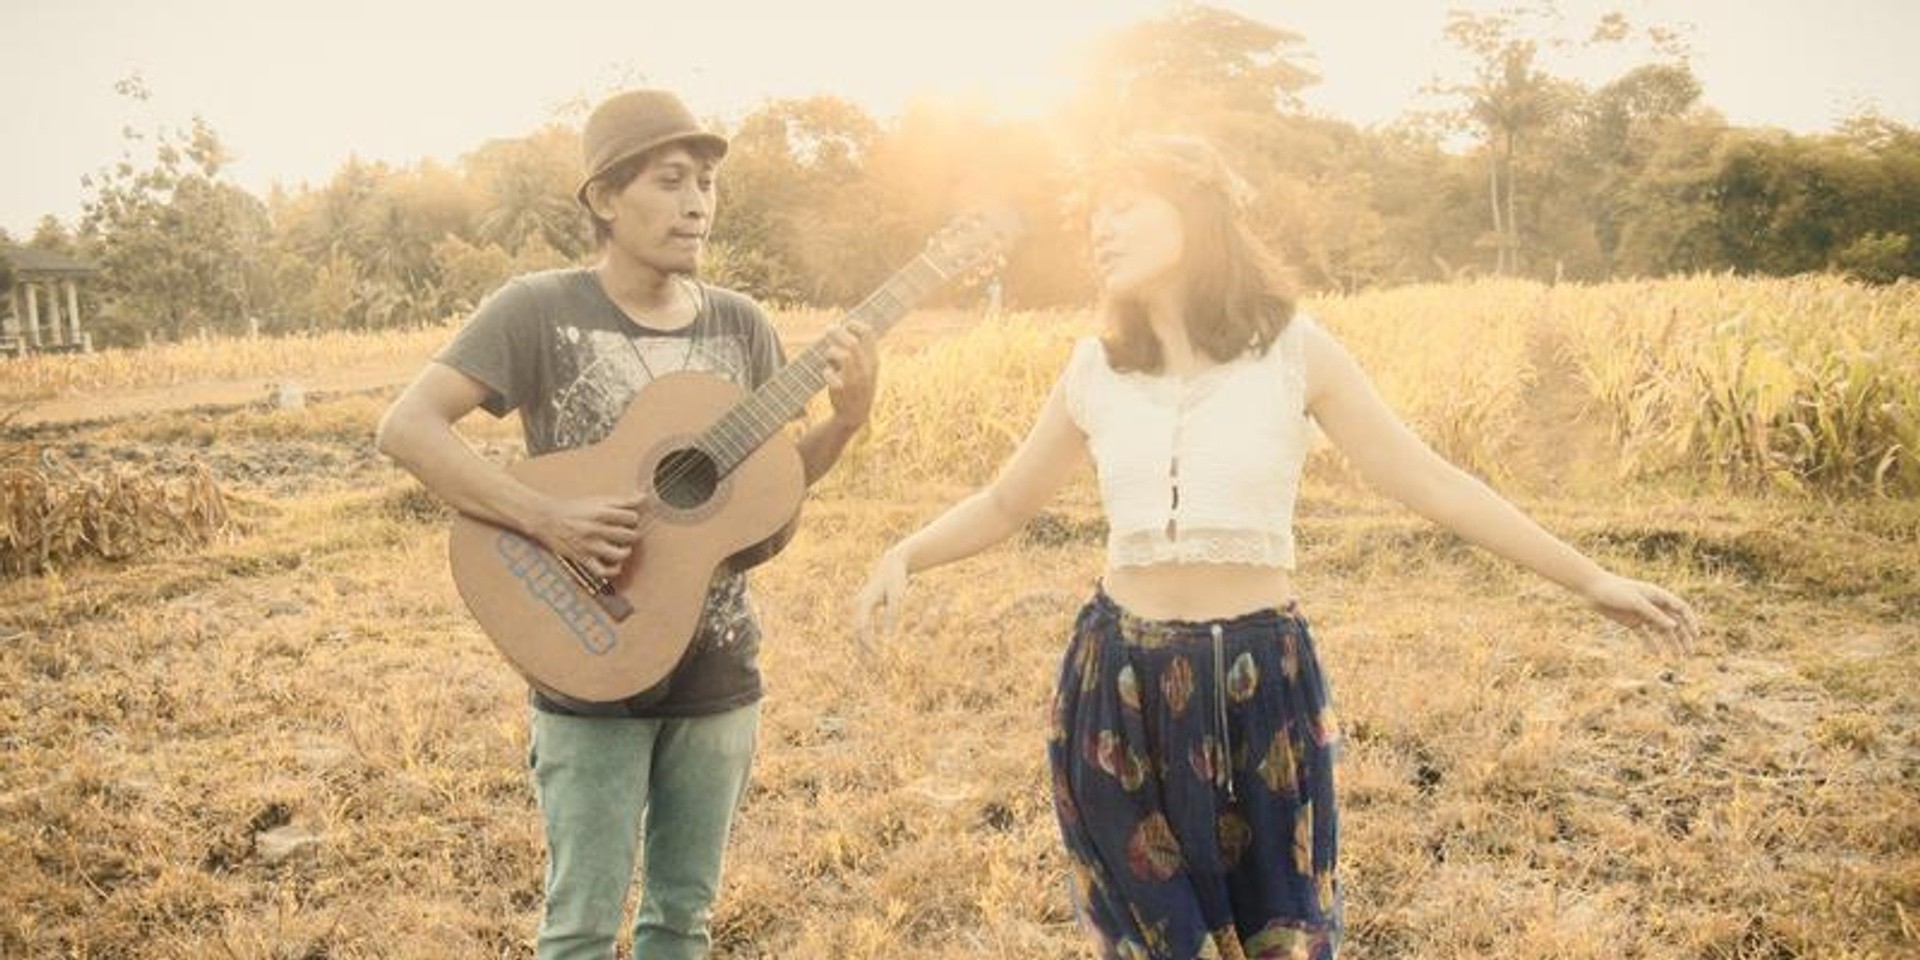 Stars and Rabbit release their latest music video 'Man Upon The Hill' — watch